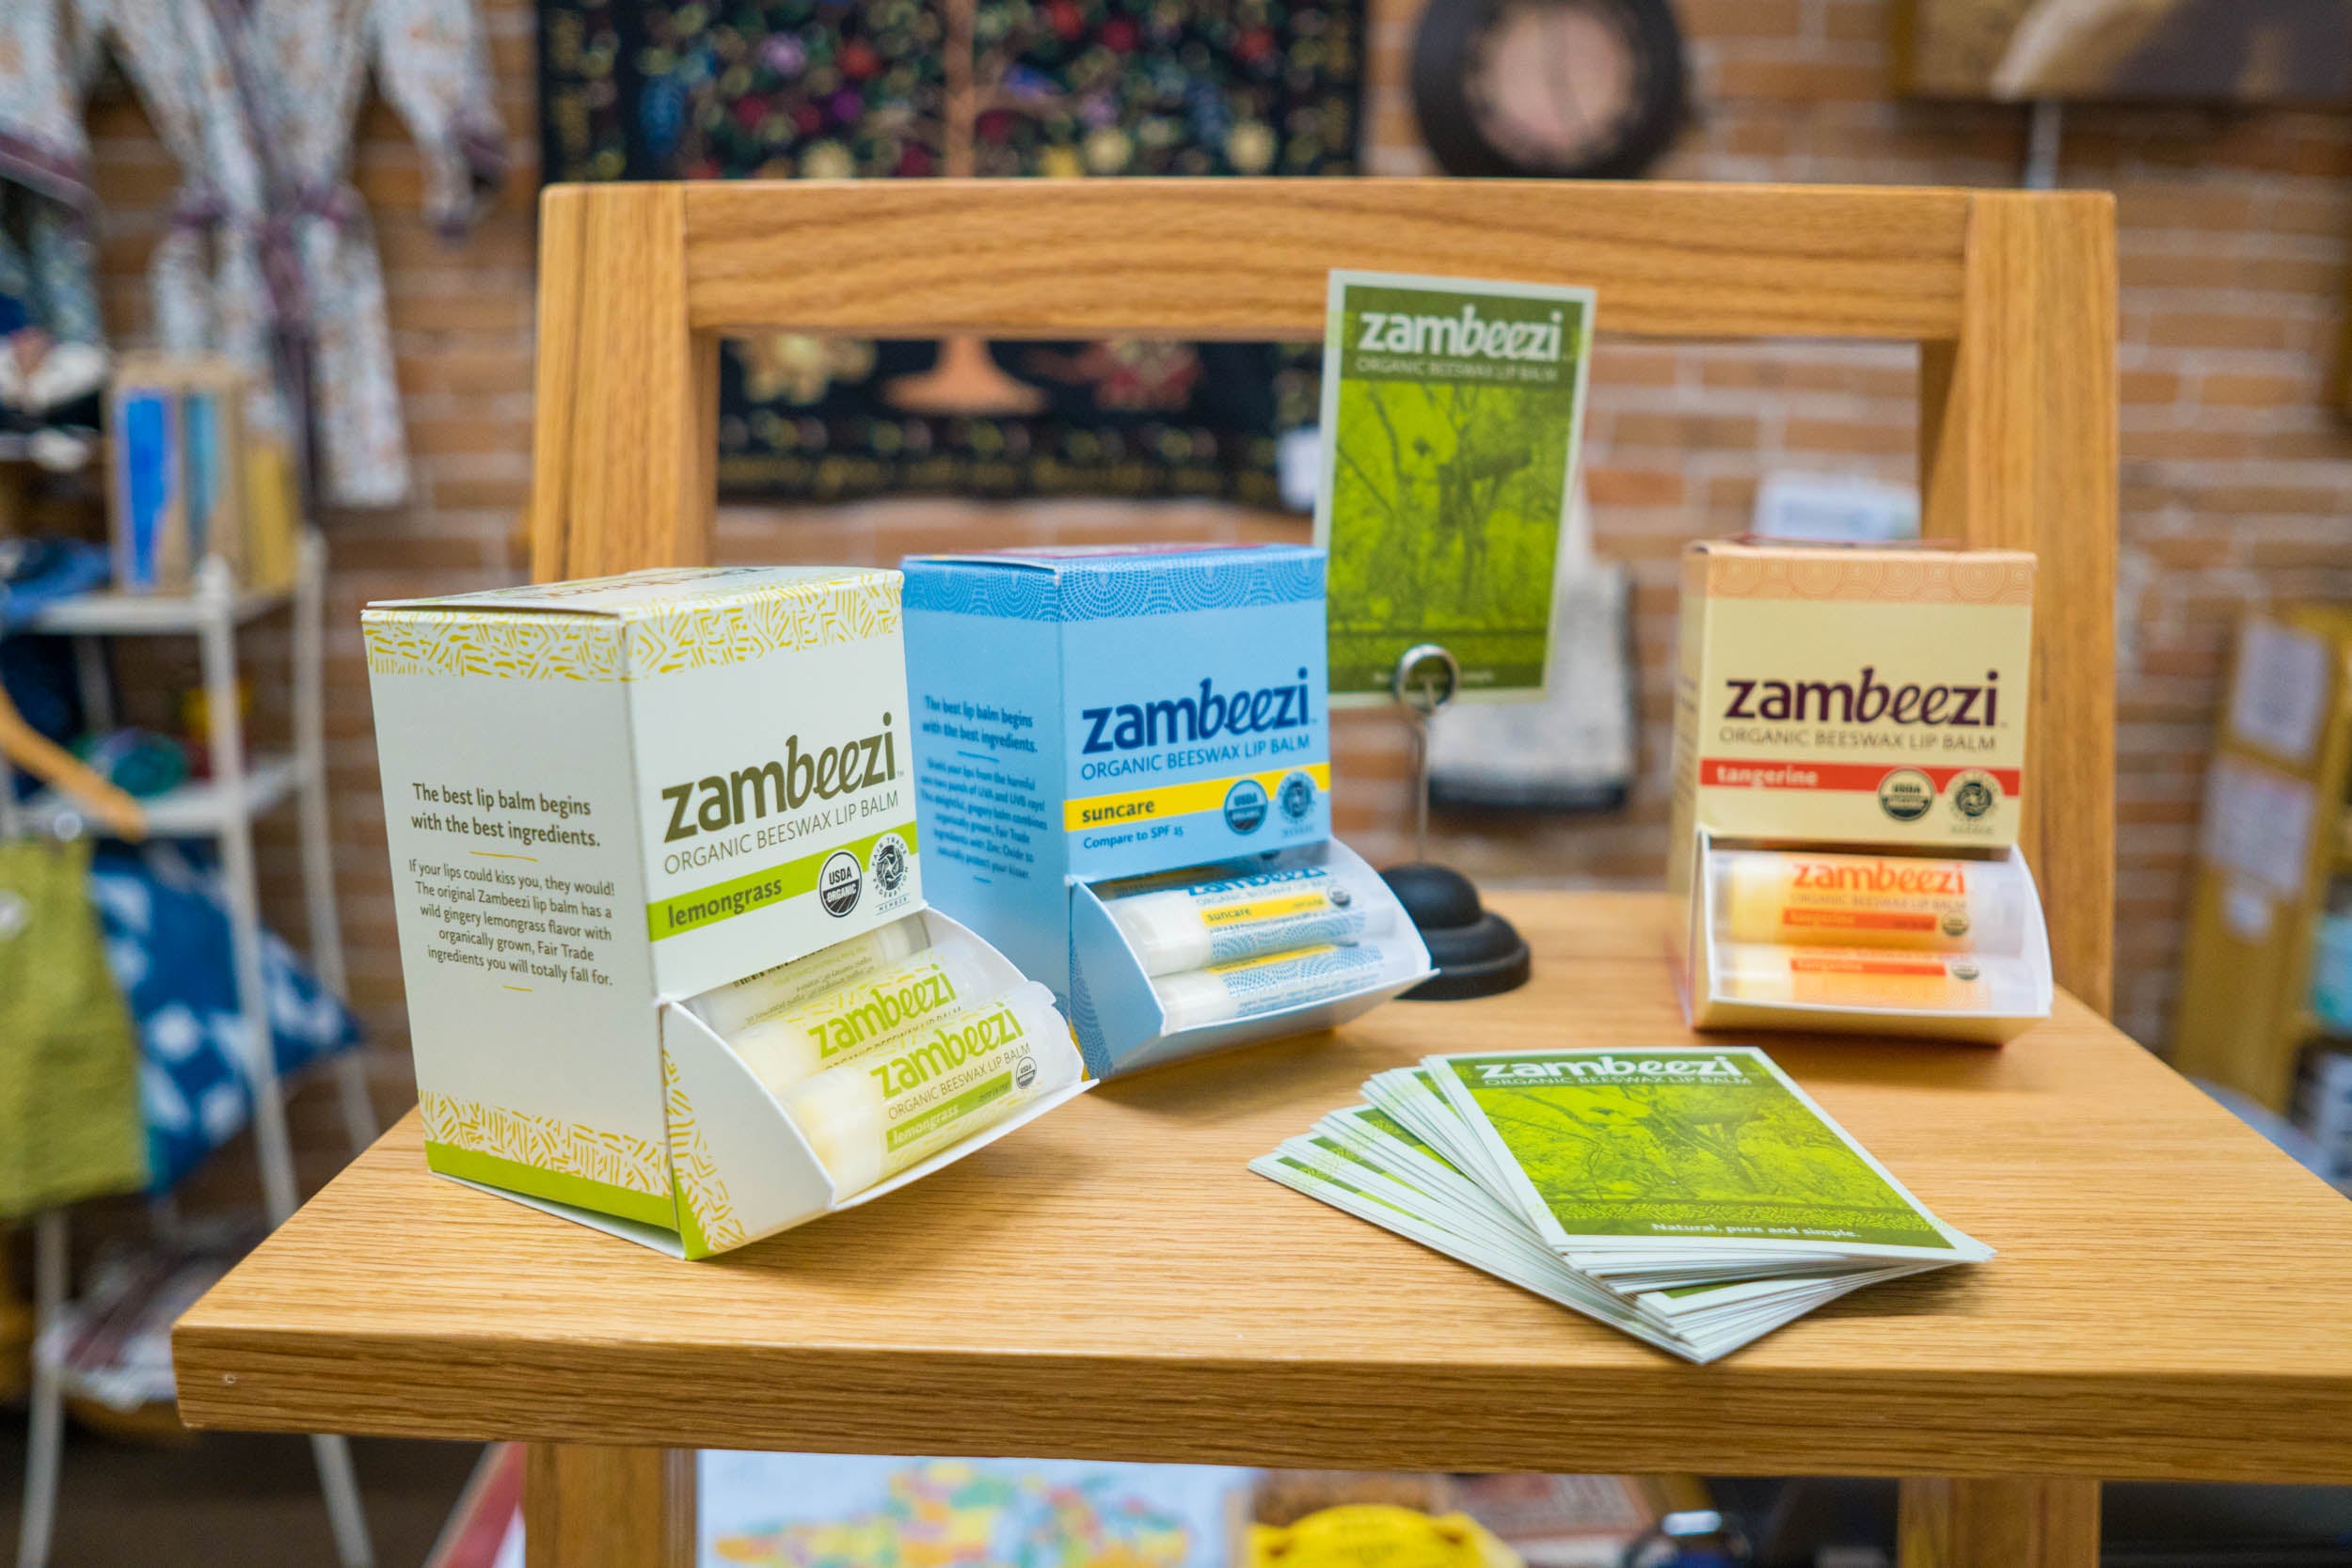 Find the best ethical chapstick at a store near you - Zambeezi Organic, Fair Trade beeswax lip balm